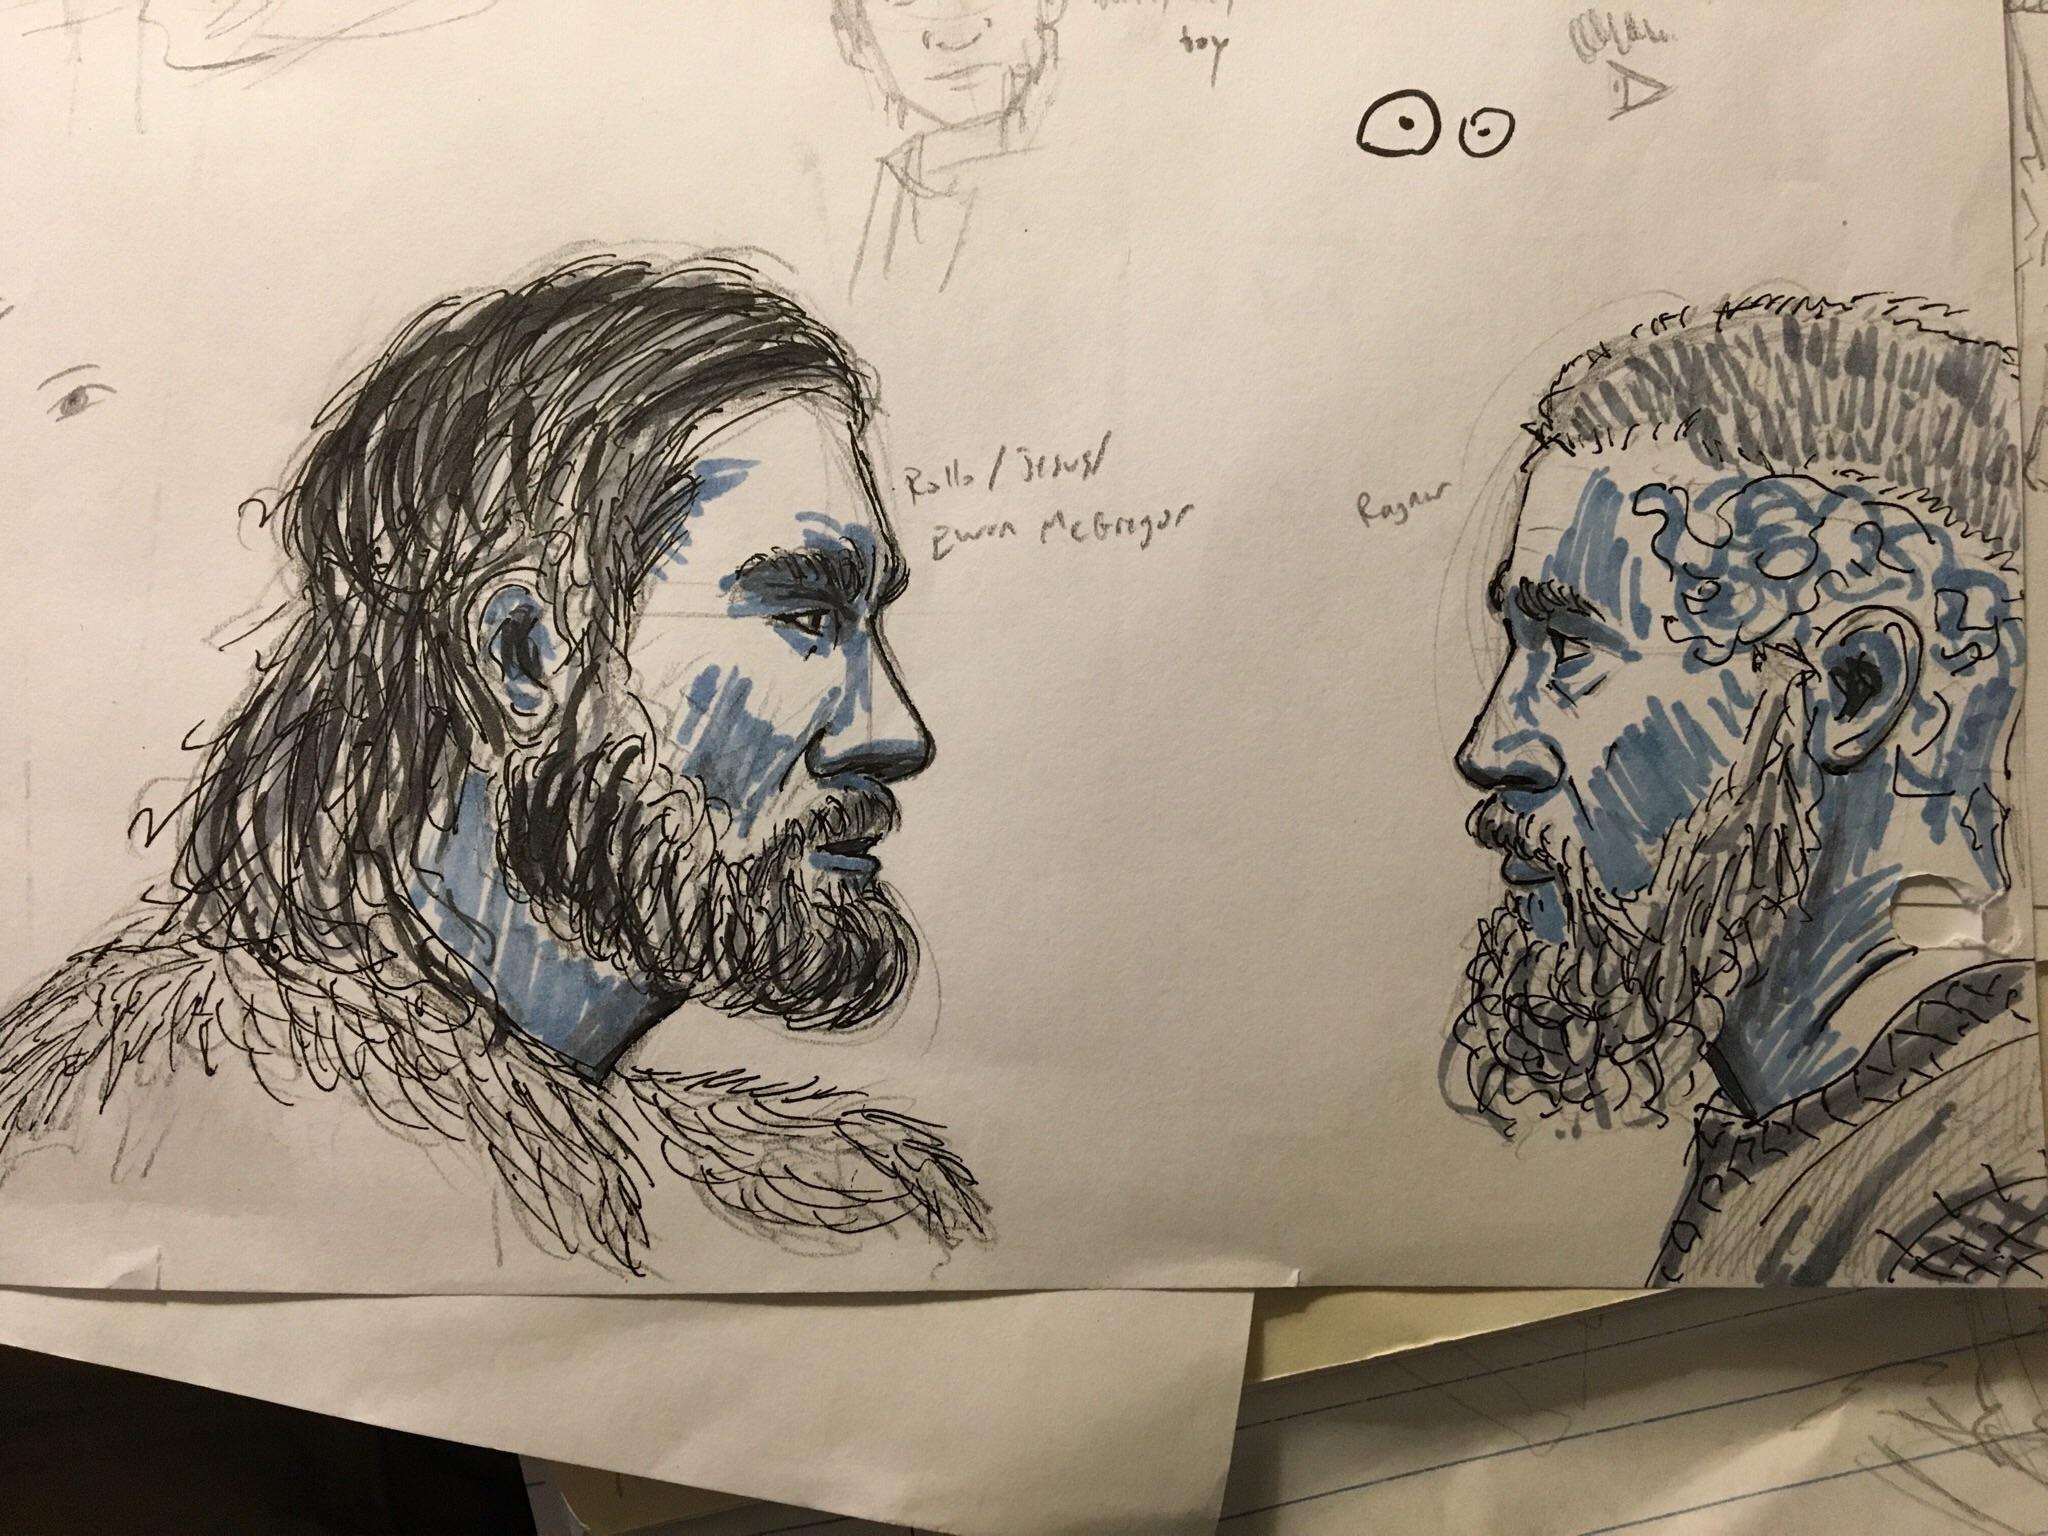 NO SPOILERS Was bored in class, doodled Rollo and Ragnar